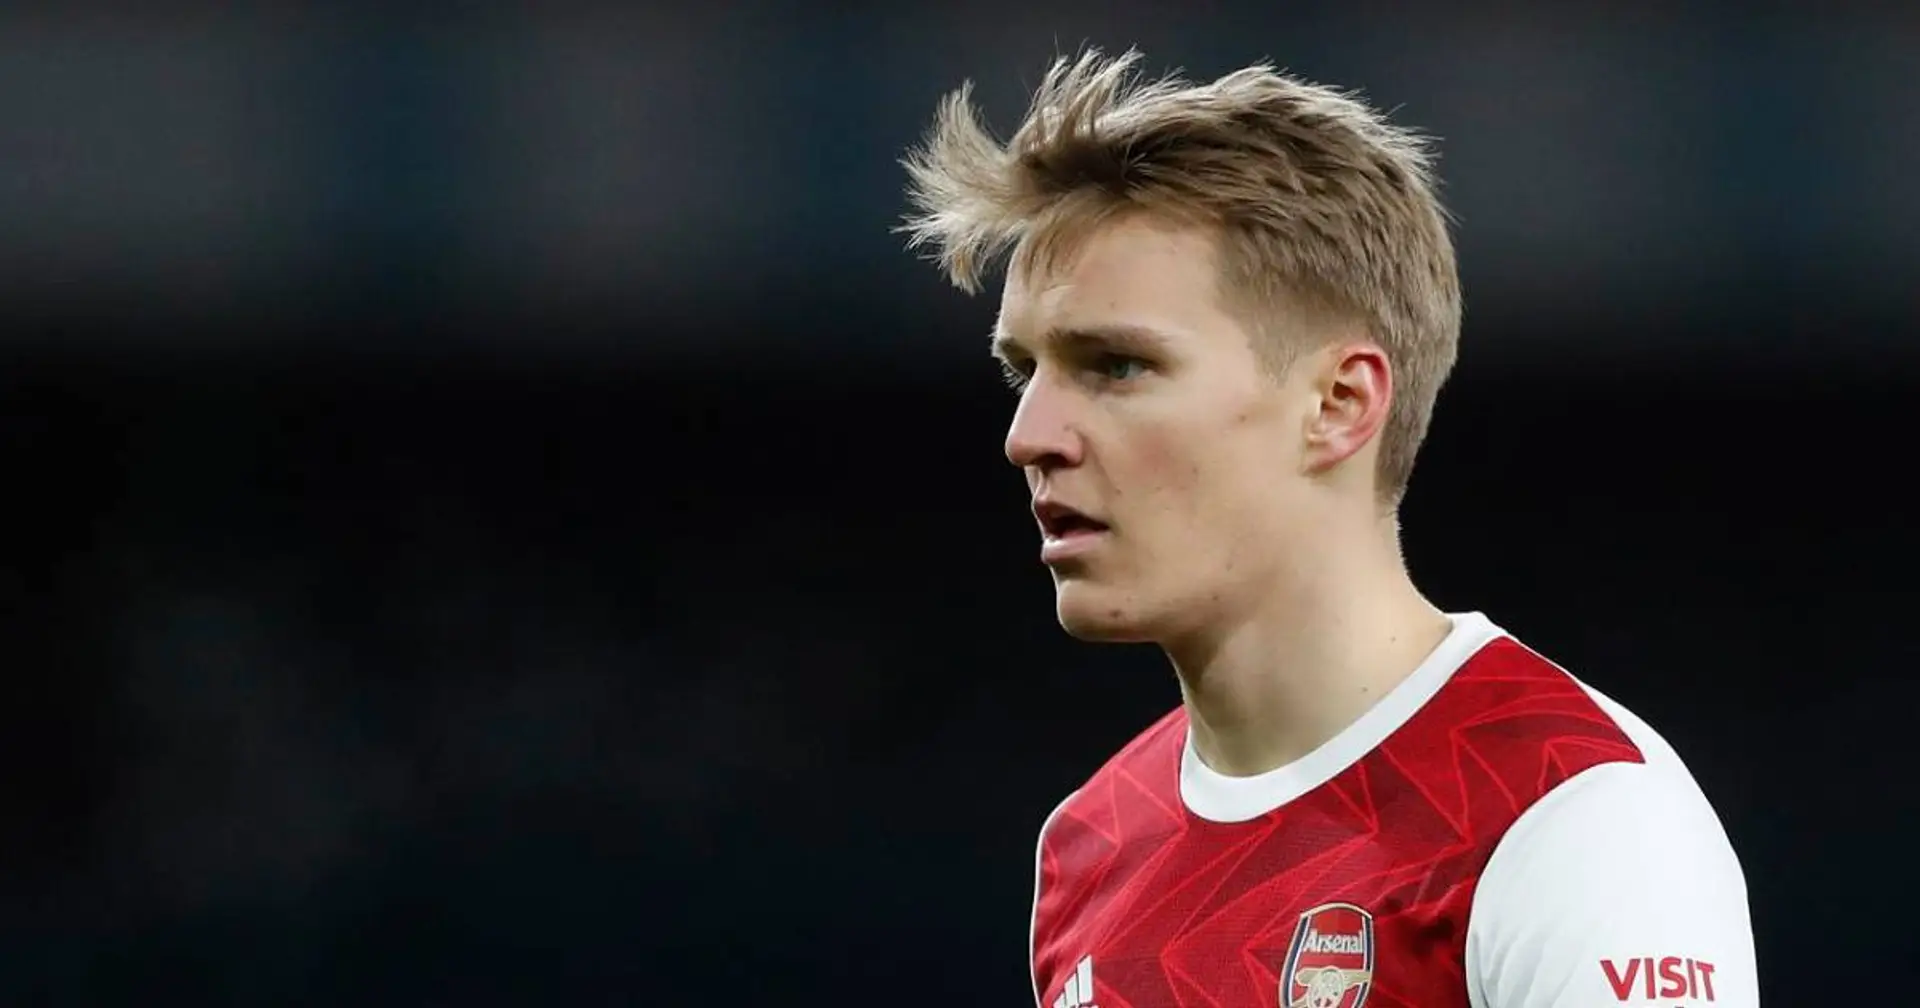 'Hope Real aren't watching his games': global Arsenal community in overdrive after Odegaard's performance